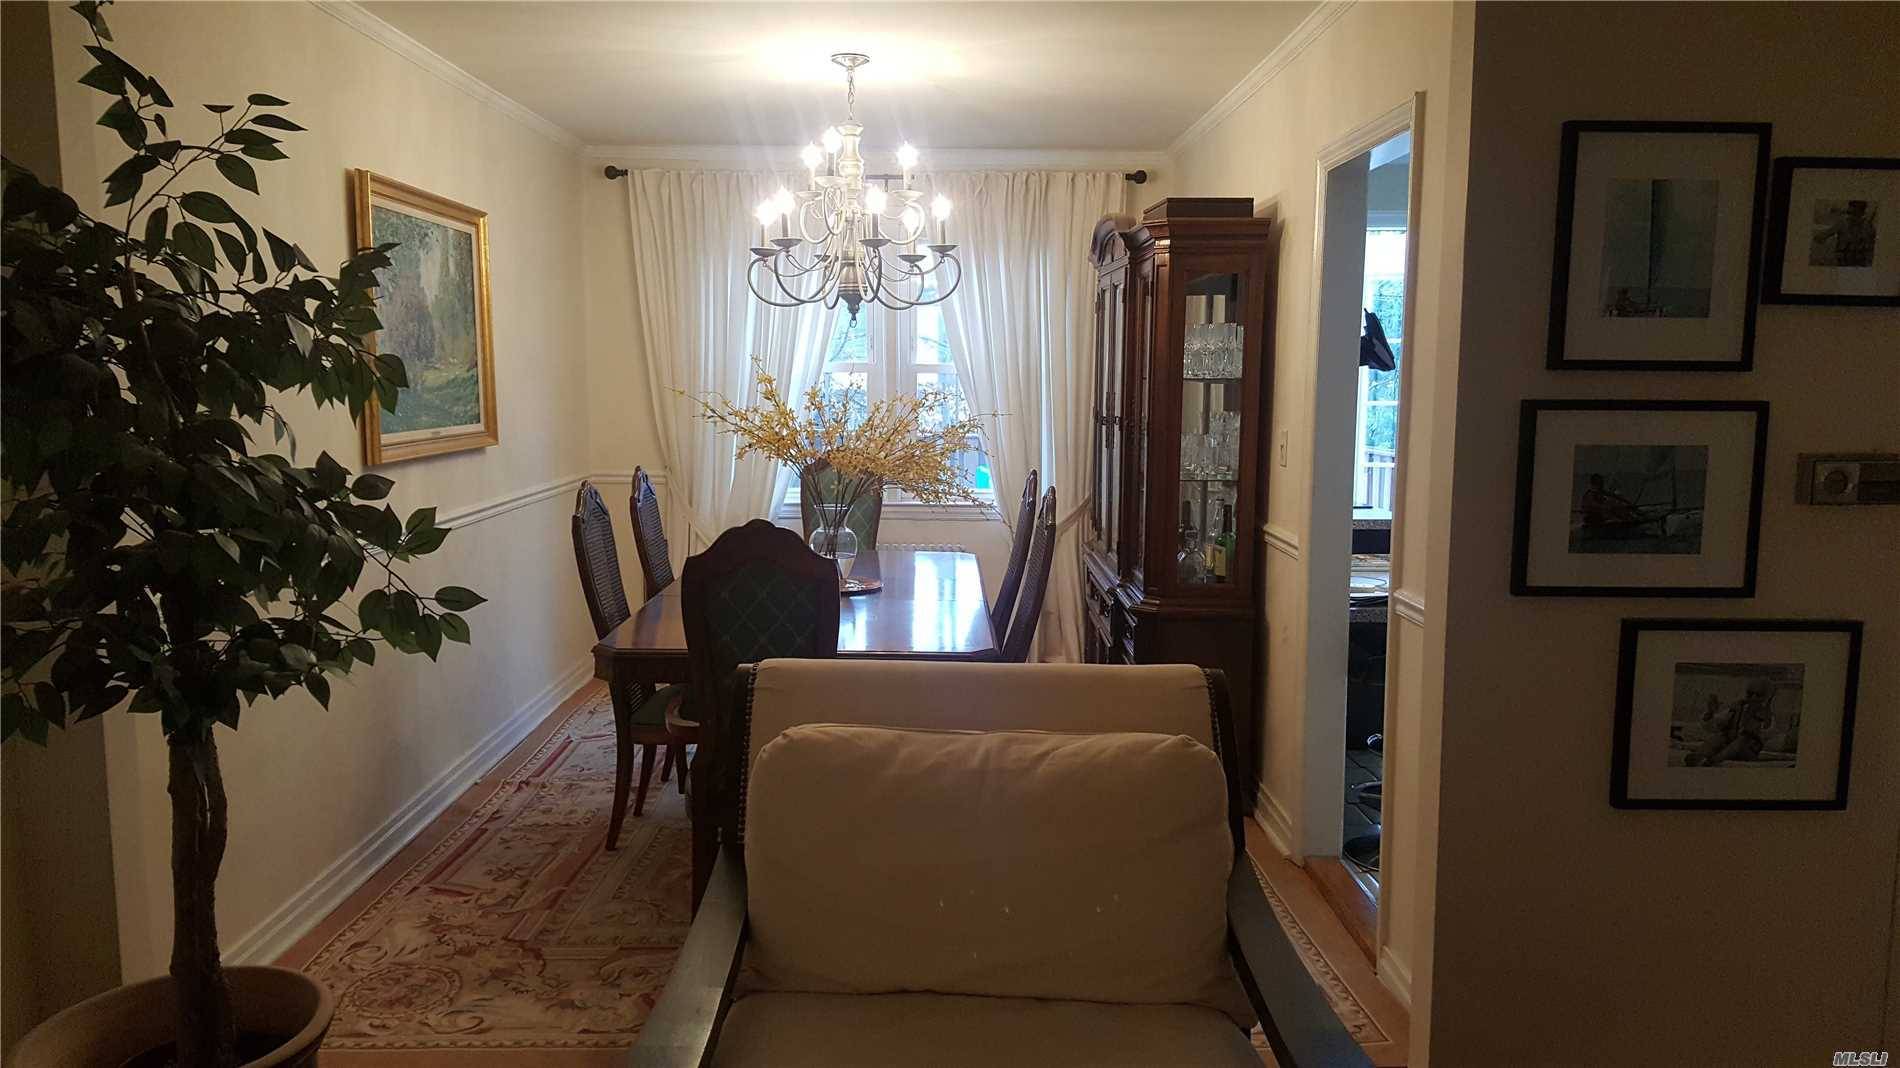 Elegant Turn Key Home,Rarely Available In The Very Desirable North Flushing Area.